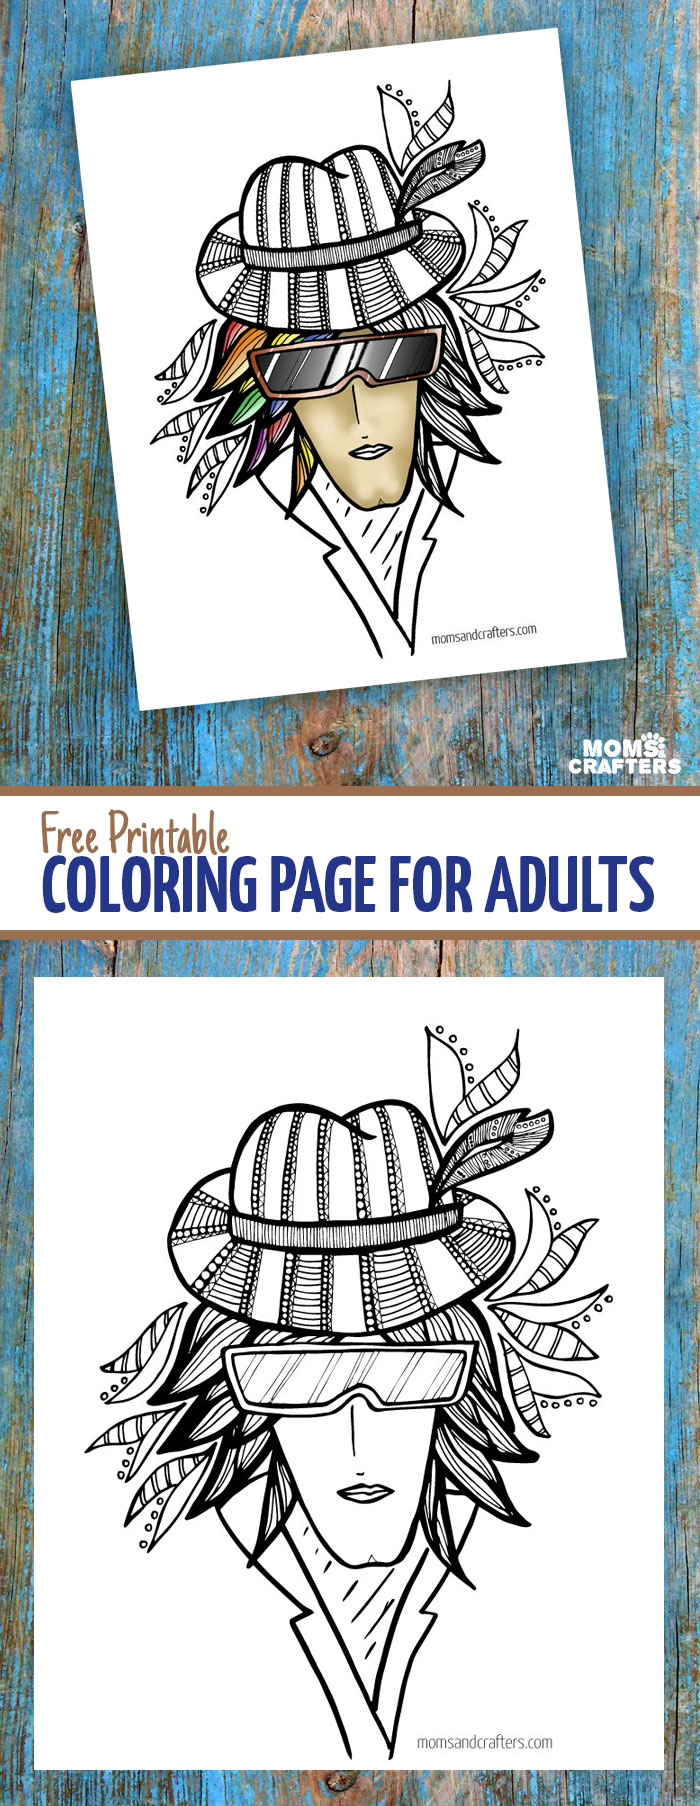 A free printable coloring page for adults, free from the illustrator! You'll love coloring this eccentric "man in hat" complex colouring page for grown-ups. It's detailed, crazy, and fun!